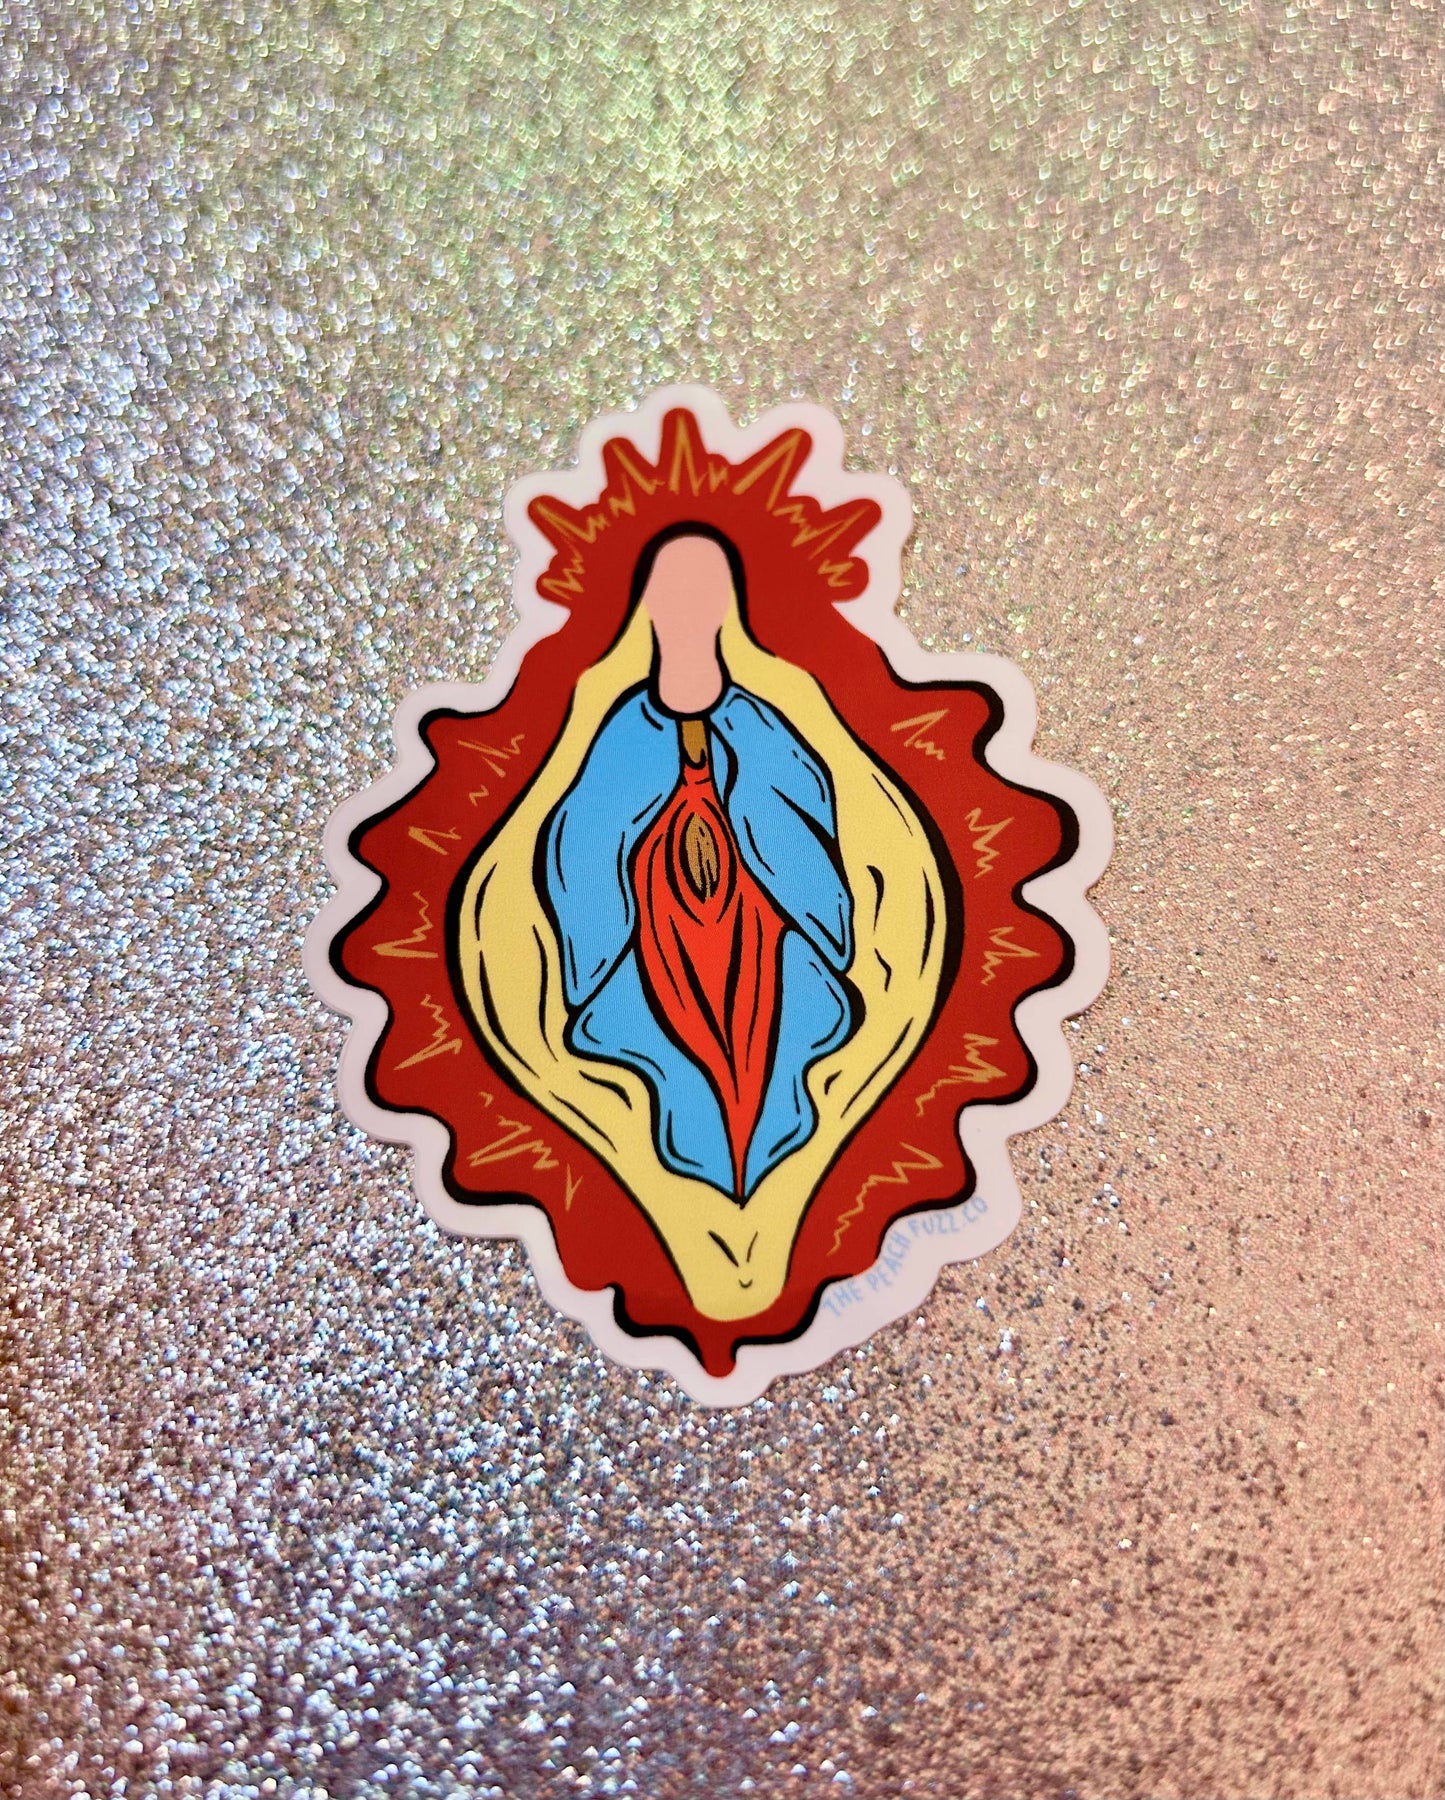 The Peach Fuzz Vulva Mary Sticker (In Store Only)